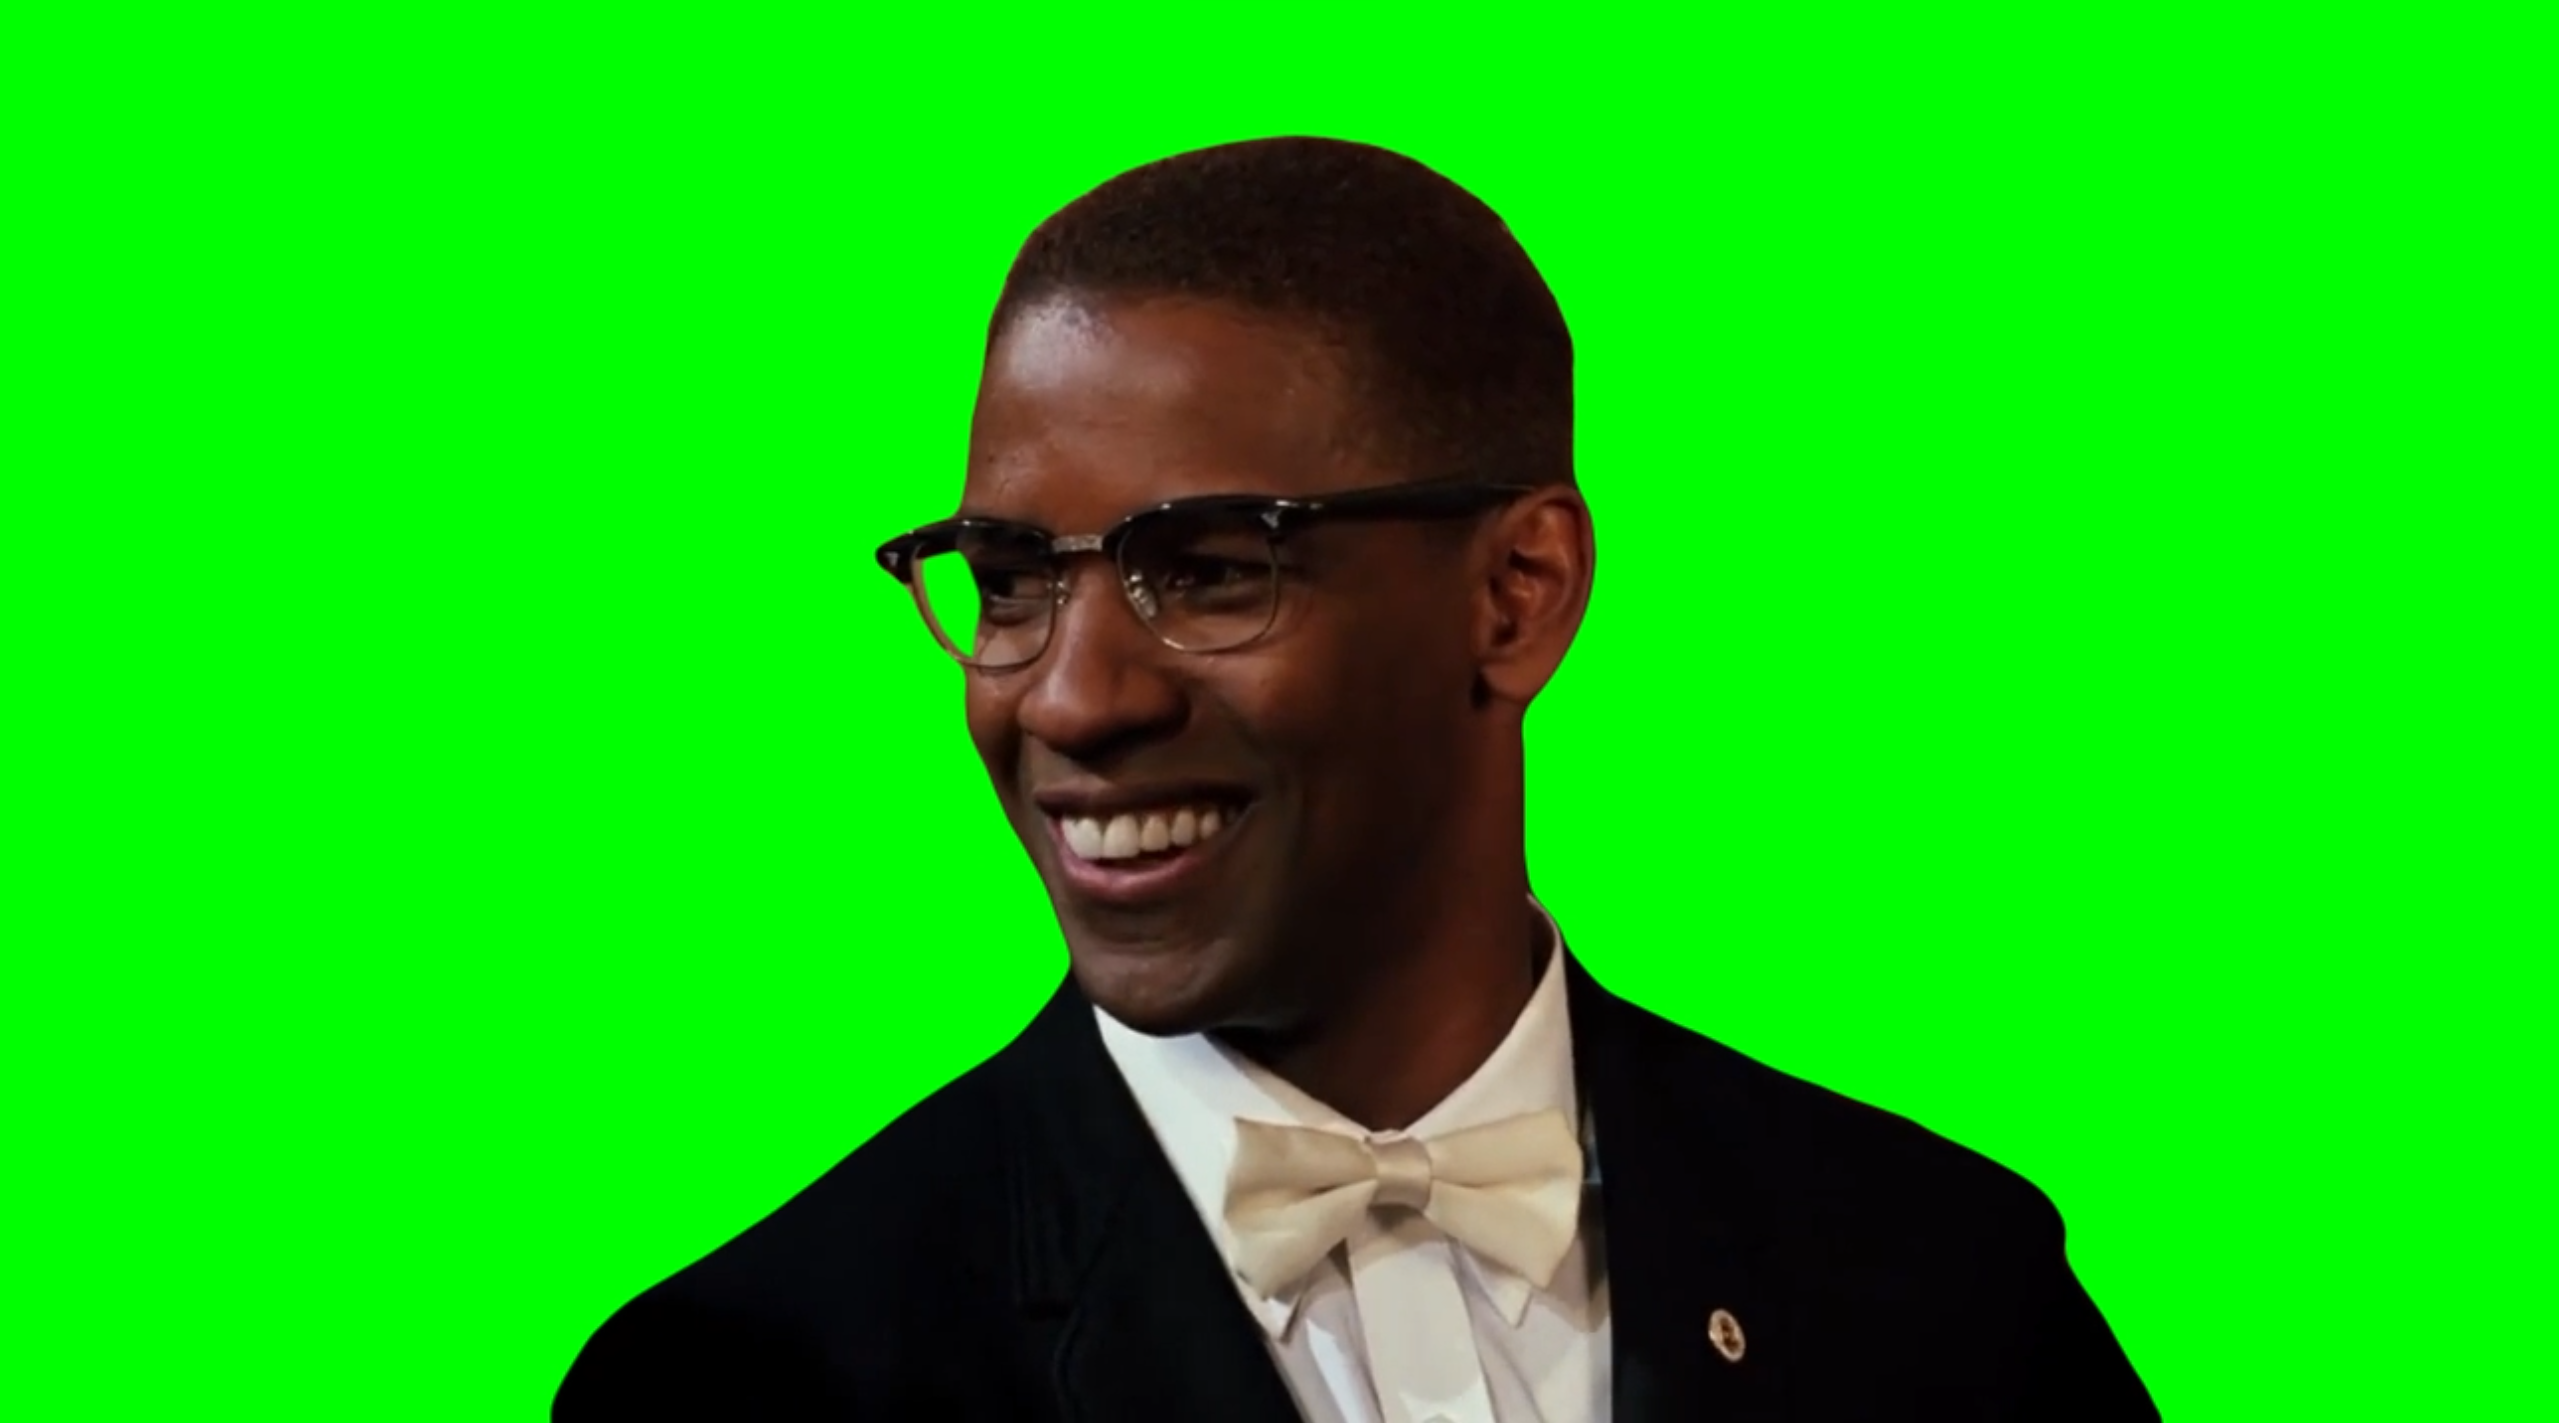 Malcolm X - Yeah that brother's starving meme (Green Screen)